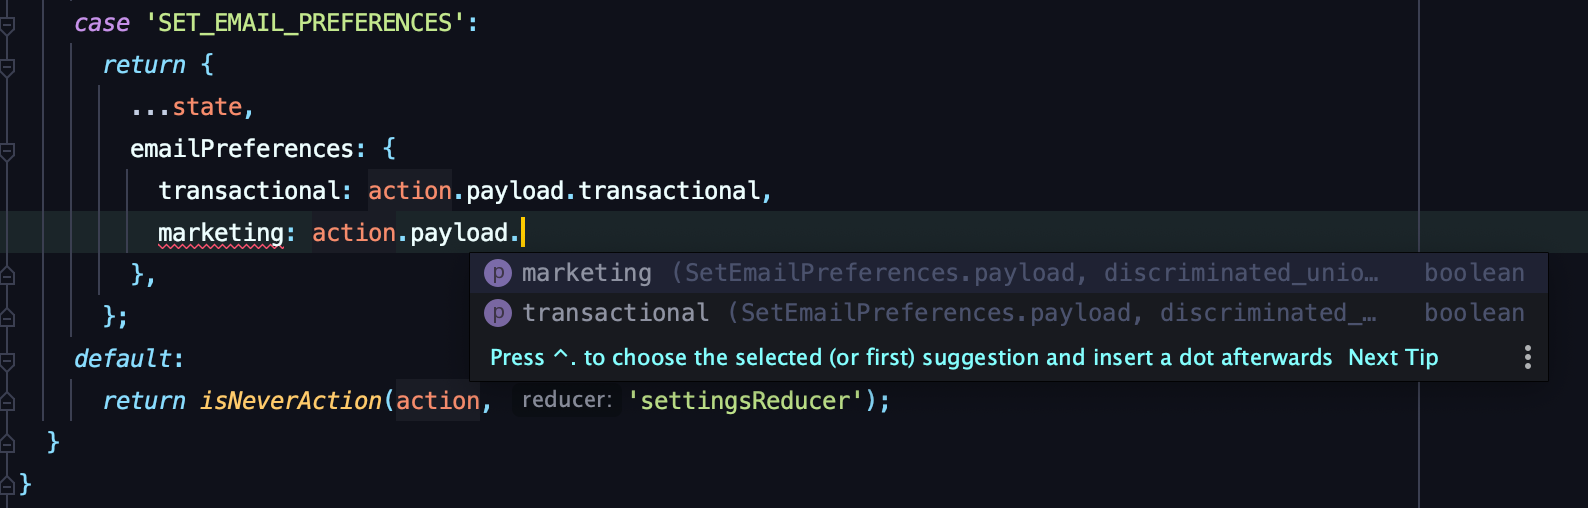 WebStorm autocomplete only has marketing or transactional